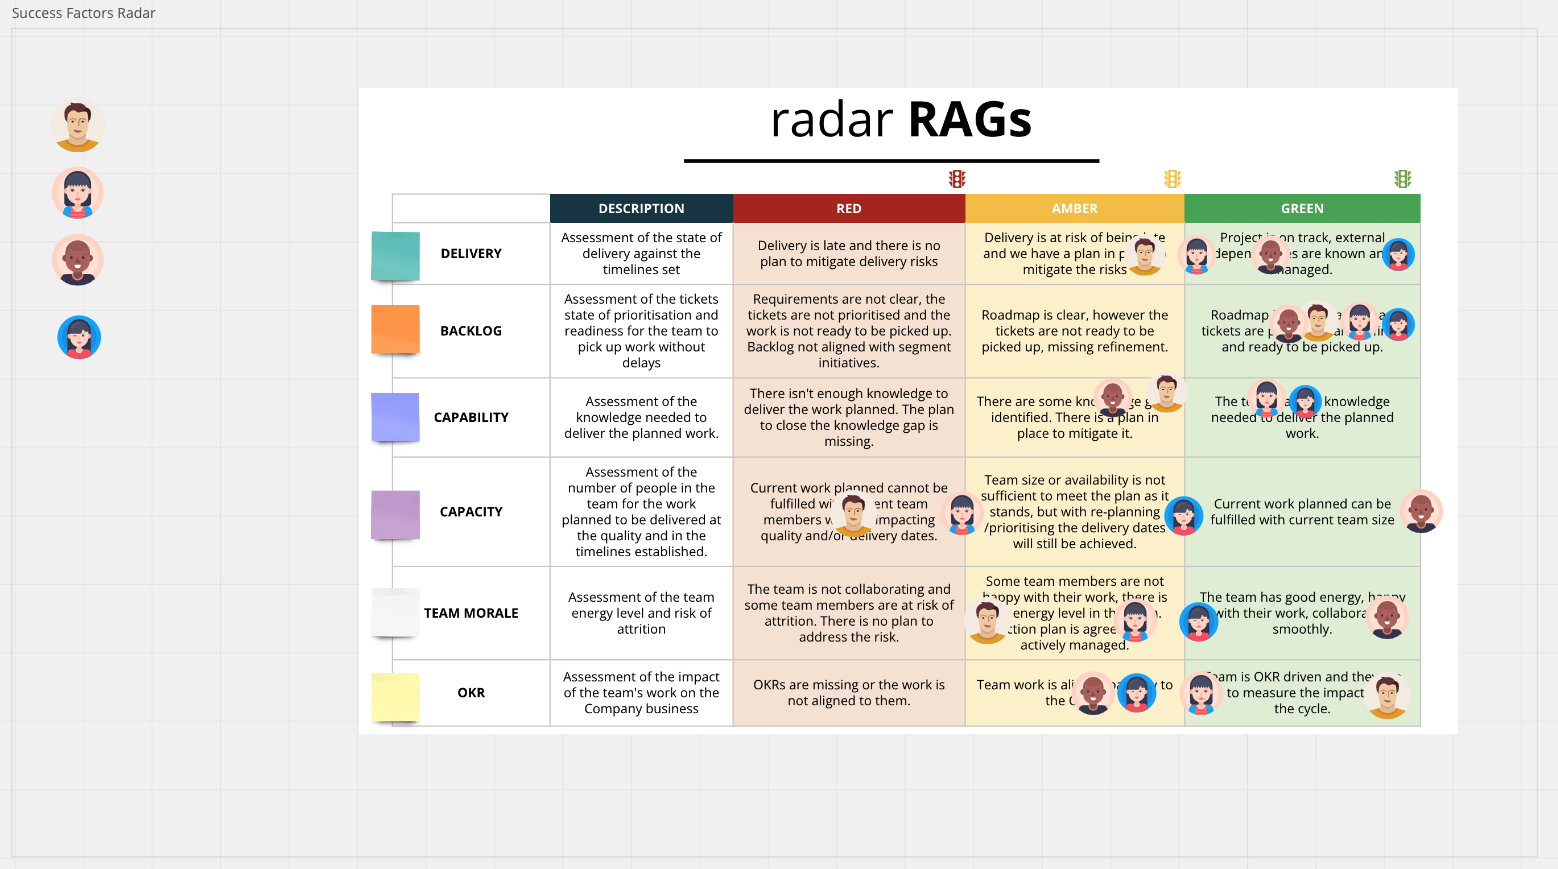 image of an example of the Success factors radar